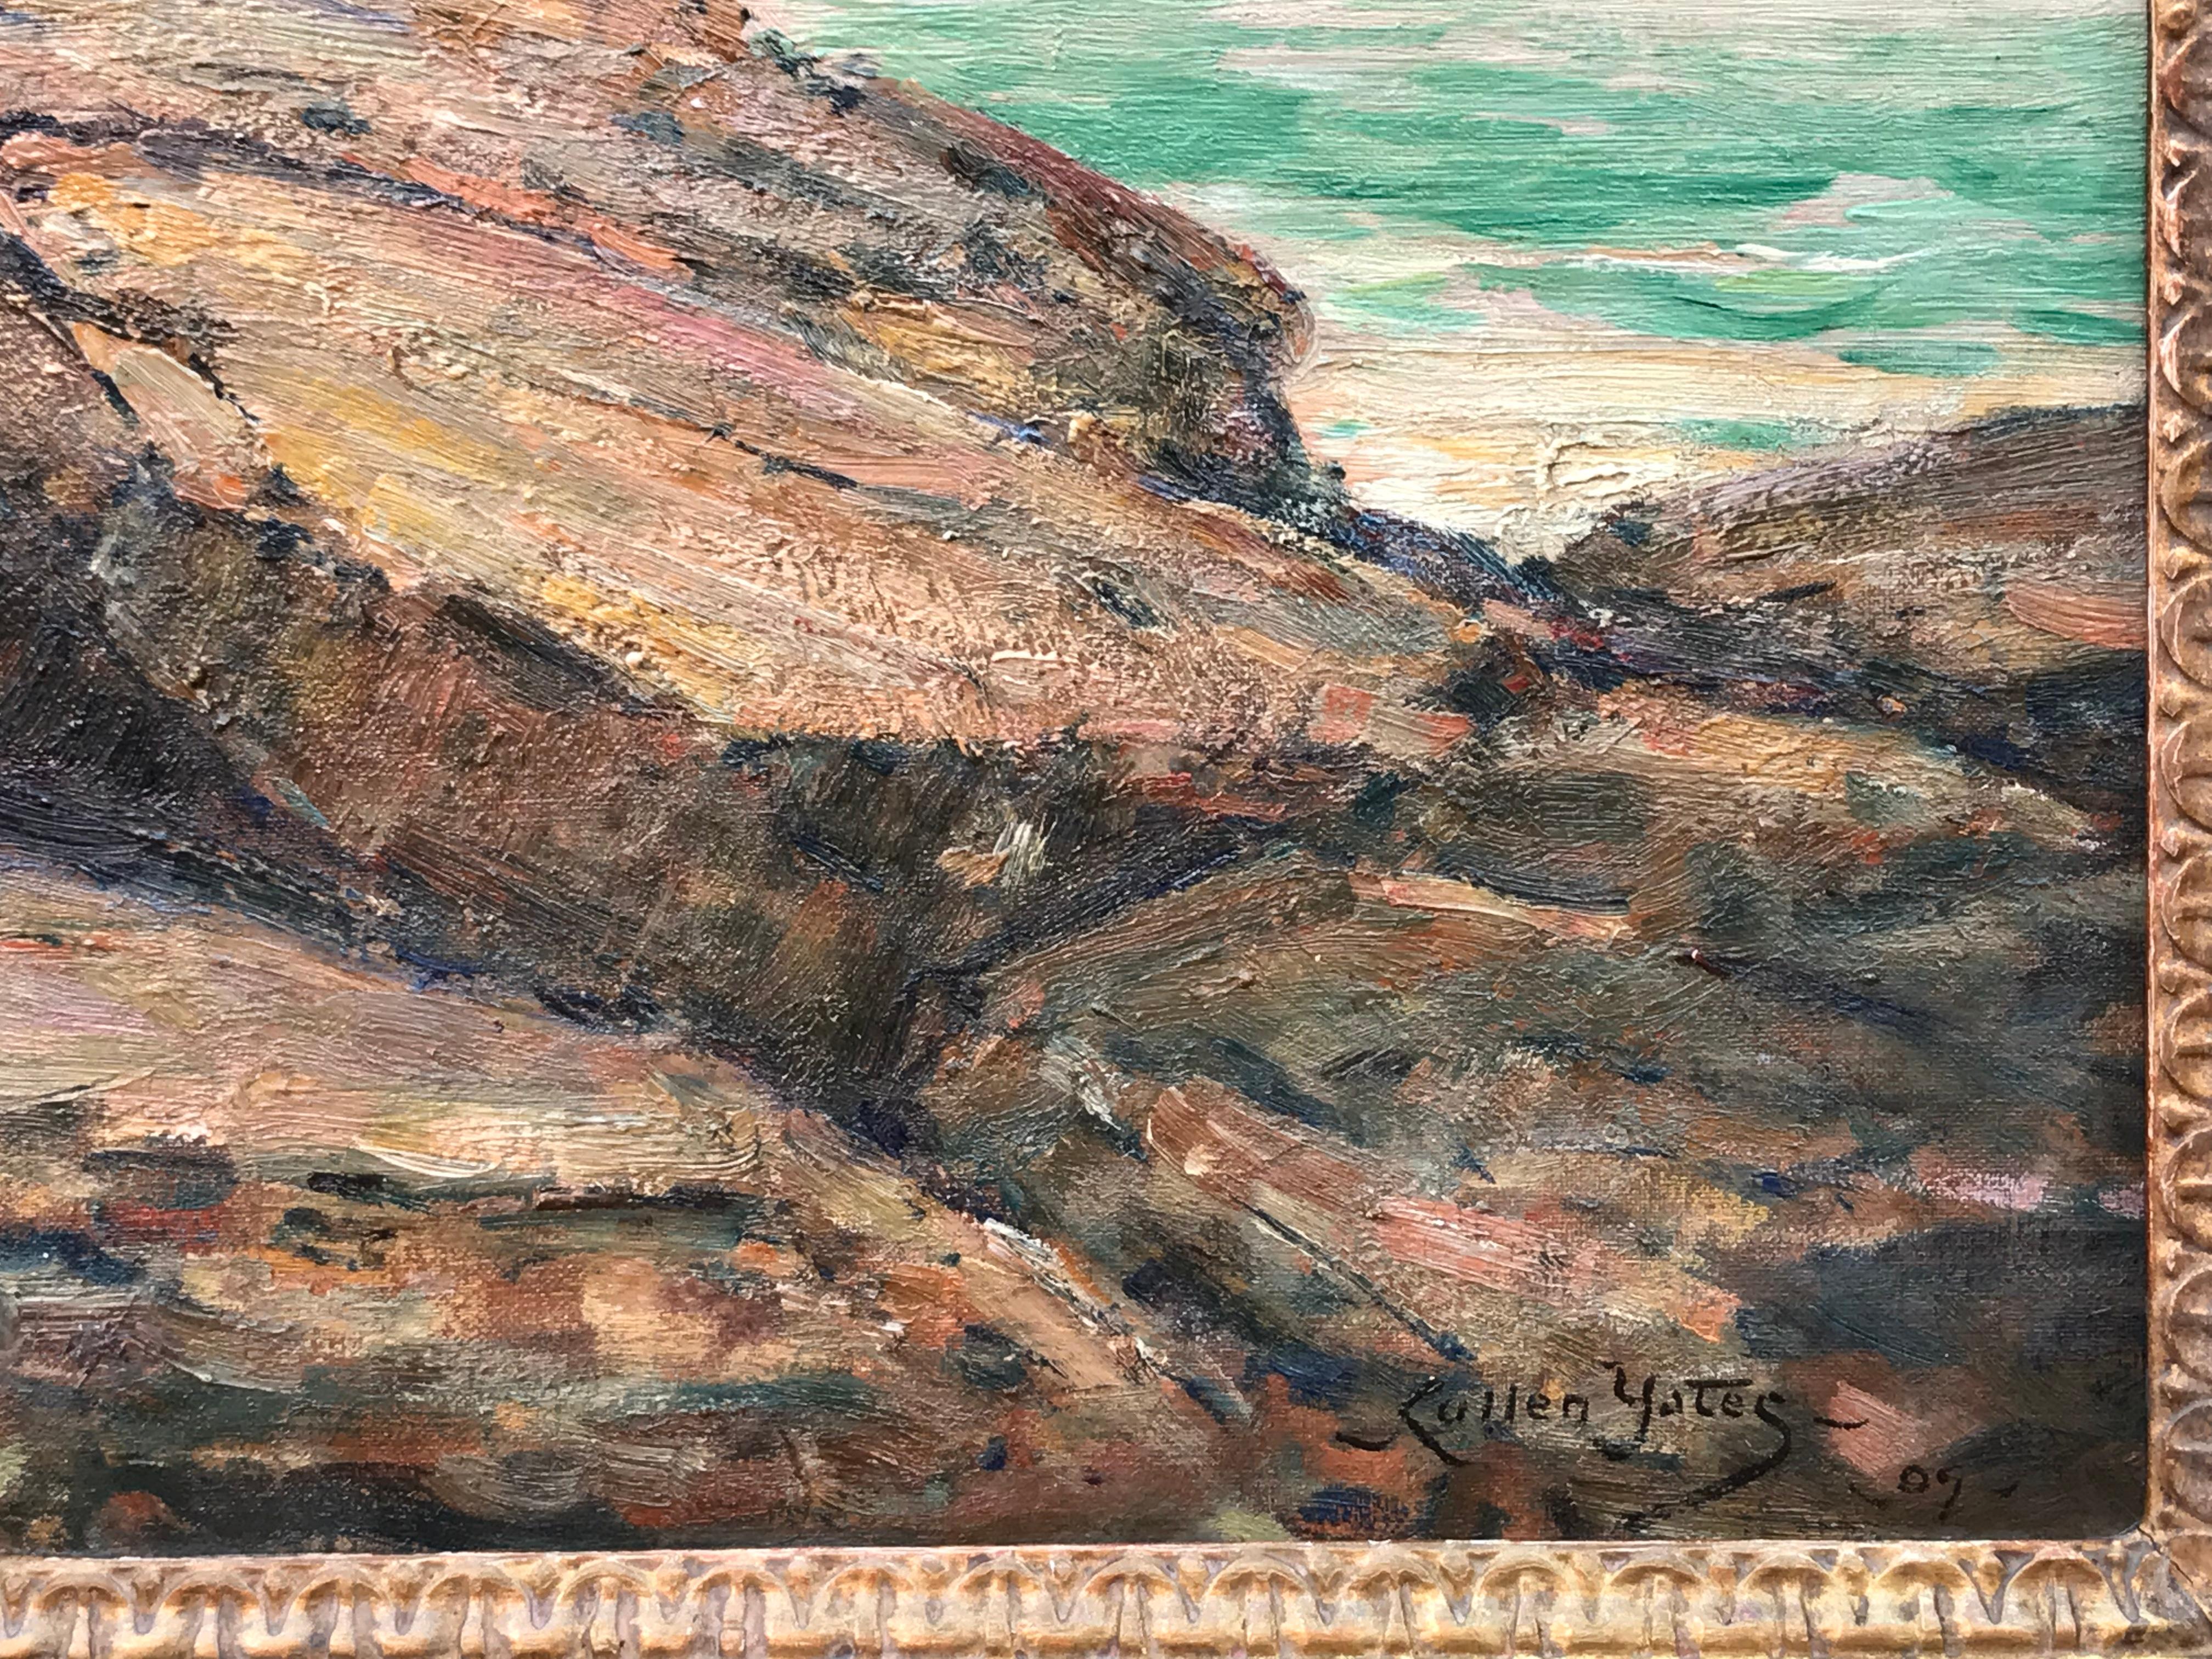 Original oil on canvas painting by the well known American painter, Cullen Yates. Signed lower right and dated 1909.
A similar painted by Yates done in the same year titled “Rockbound” of Cape Ann is held by the Smithsonian Museum.
Overall in